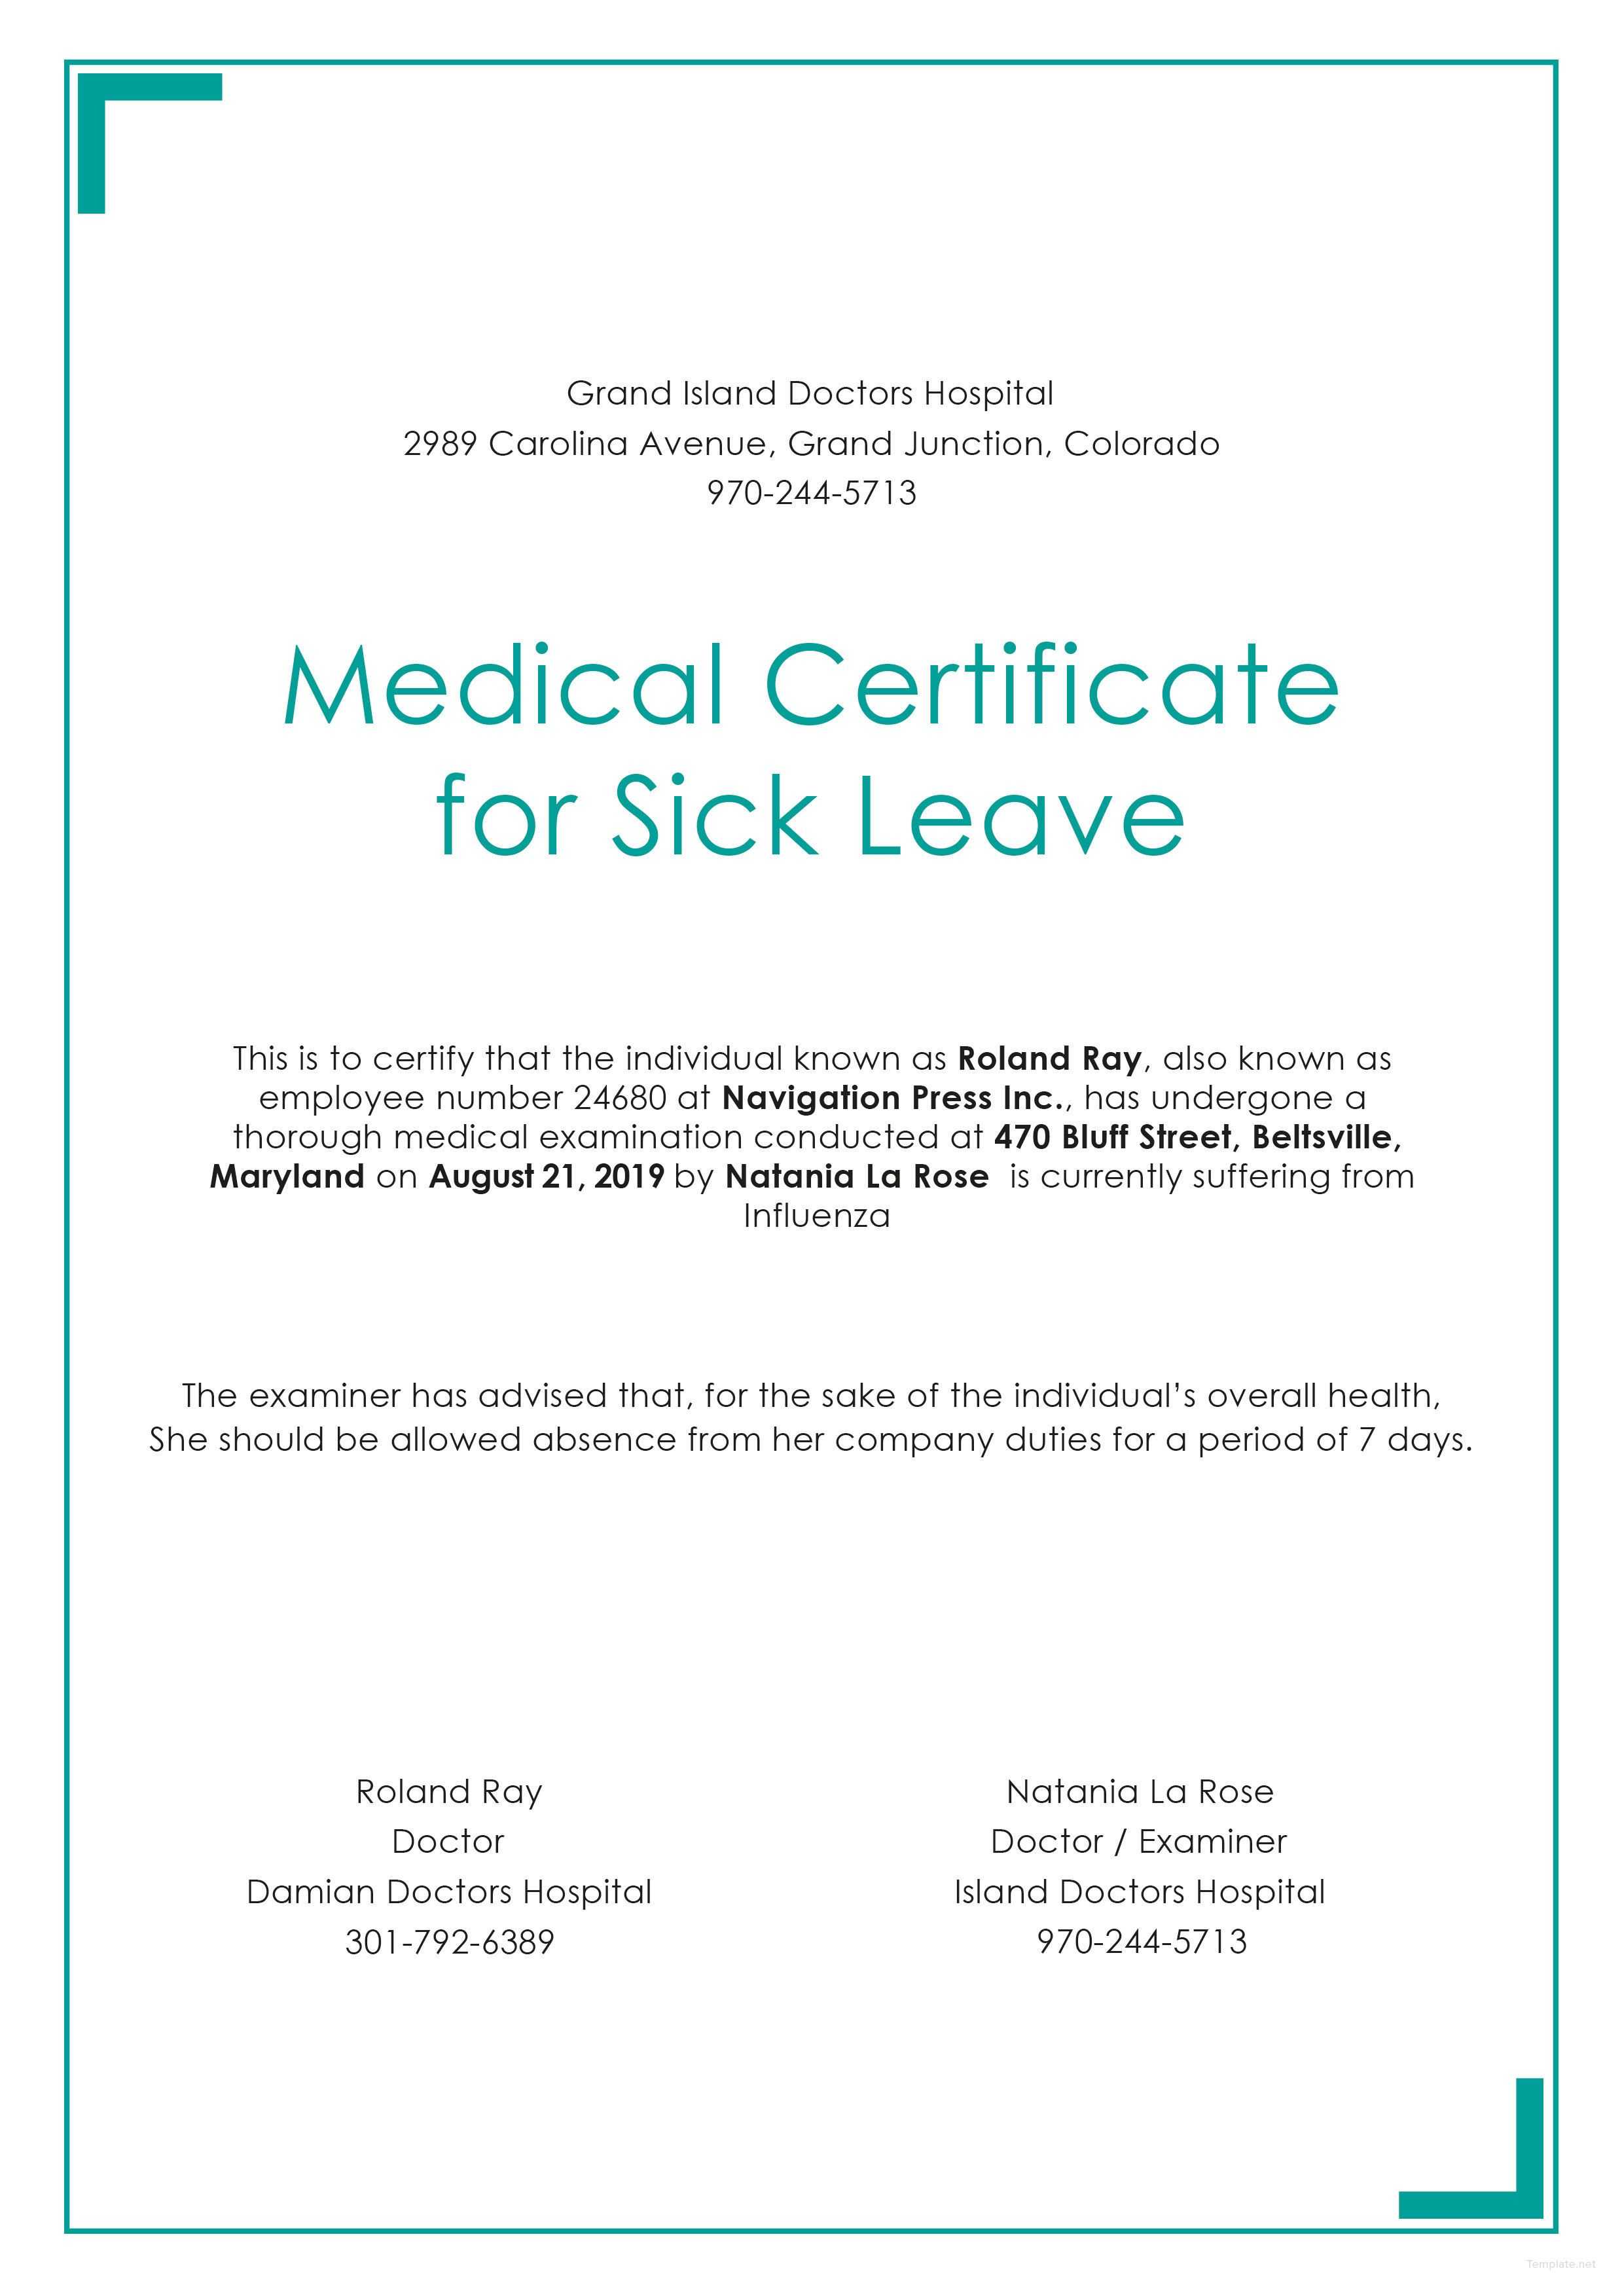 Free Medical Certificate For Sick Leave | Medical, Doctors In Fake Medical Certificate Template Download